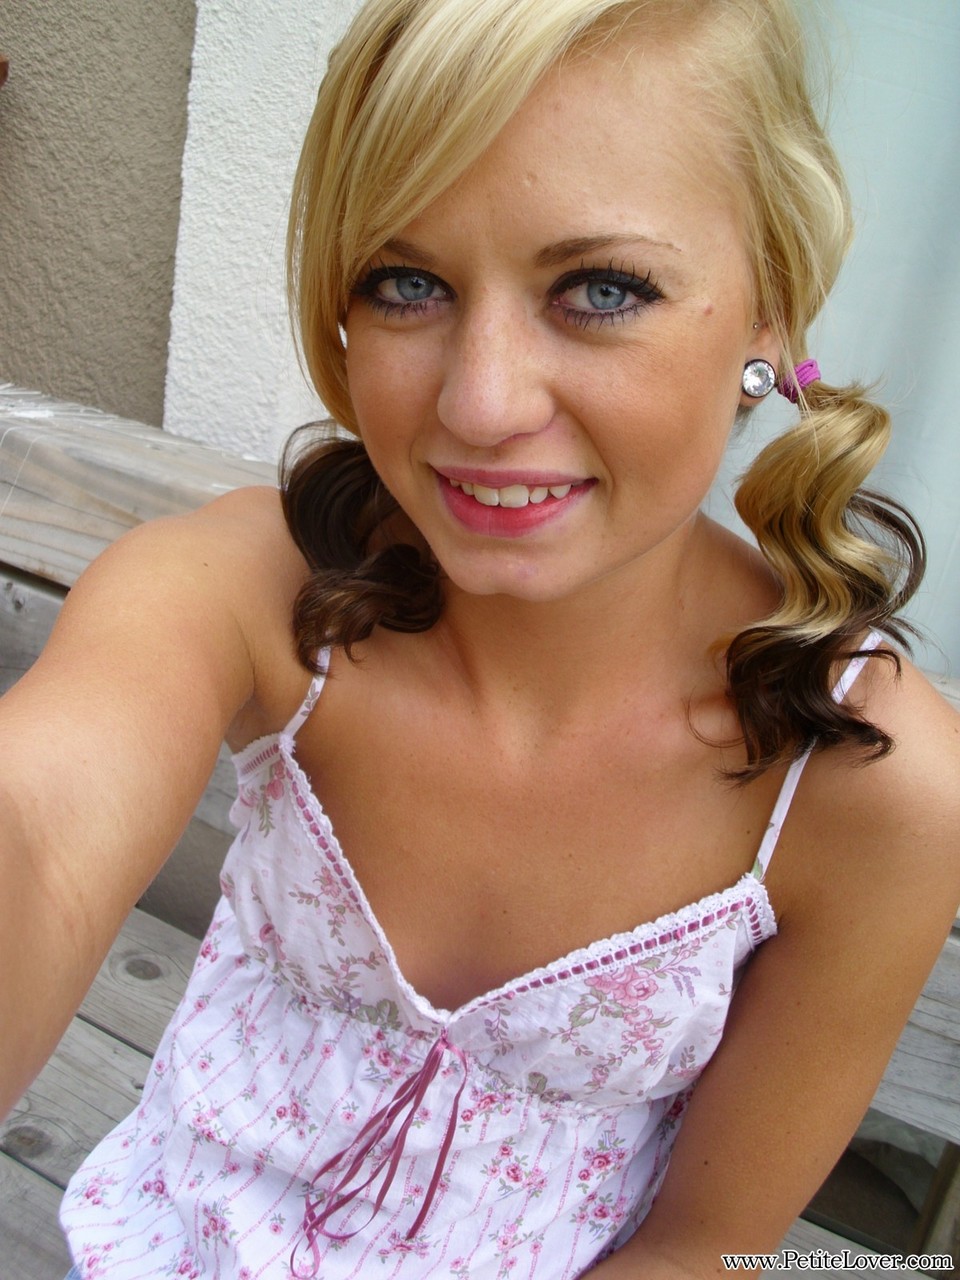 Cute blonde Tiff in pigtails showing off her wee small tits & tiny bald pussy 色情照片 #428361803 | Petite Lover Pics, Tiff, Amateur, 手机色情